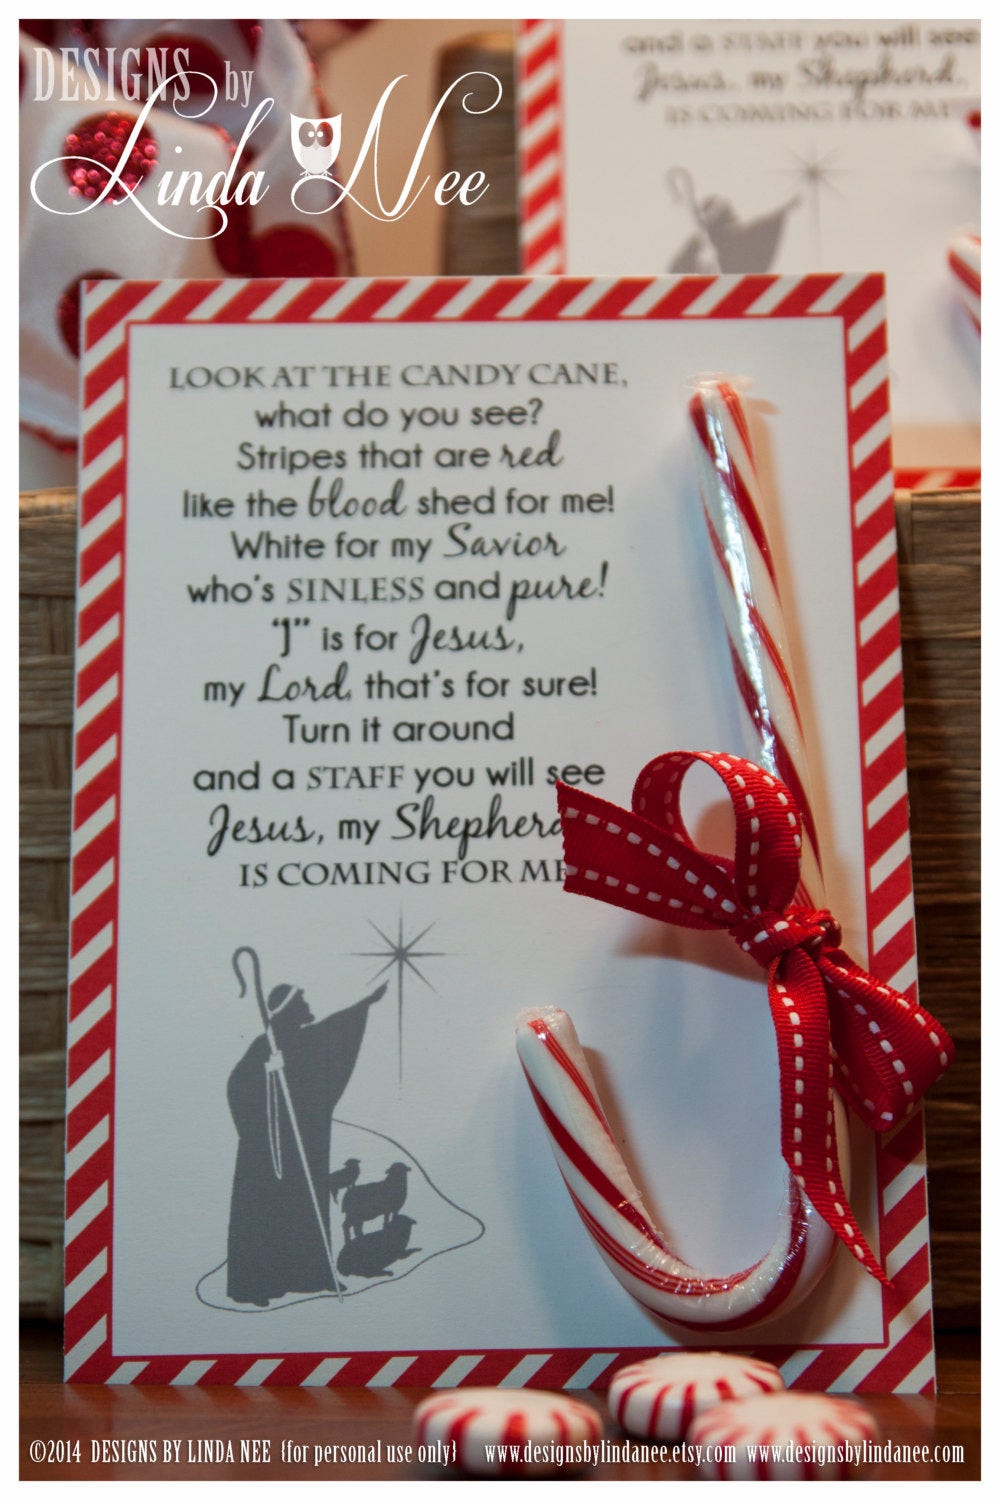 Candy Cane Christmas Cards
 Legend of the Candy Cane Card for Witnessing at Christmas